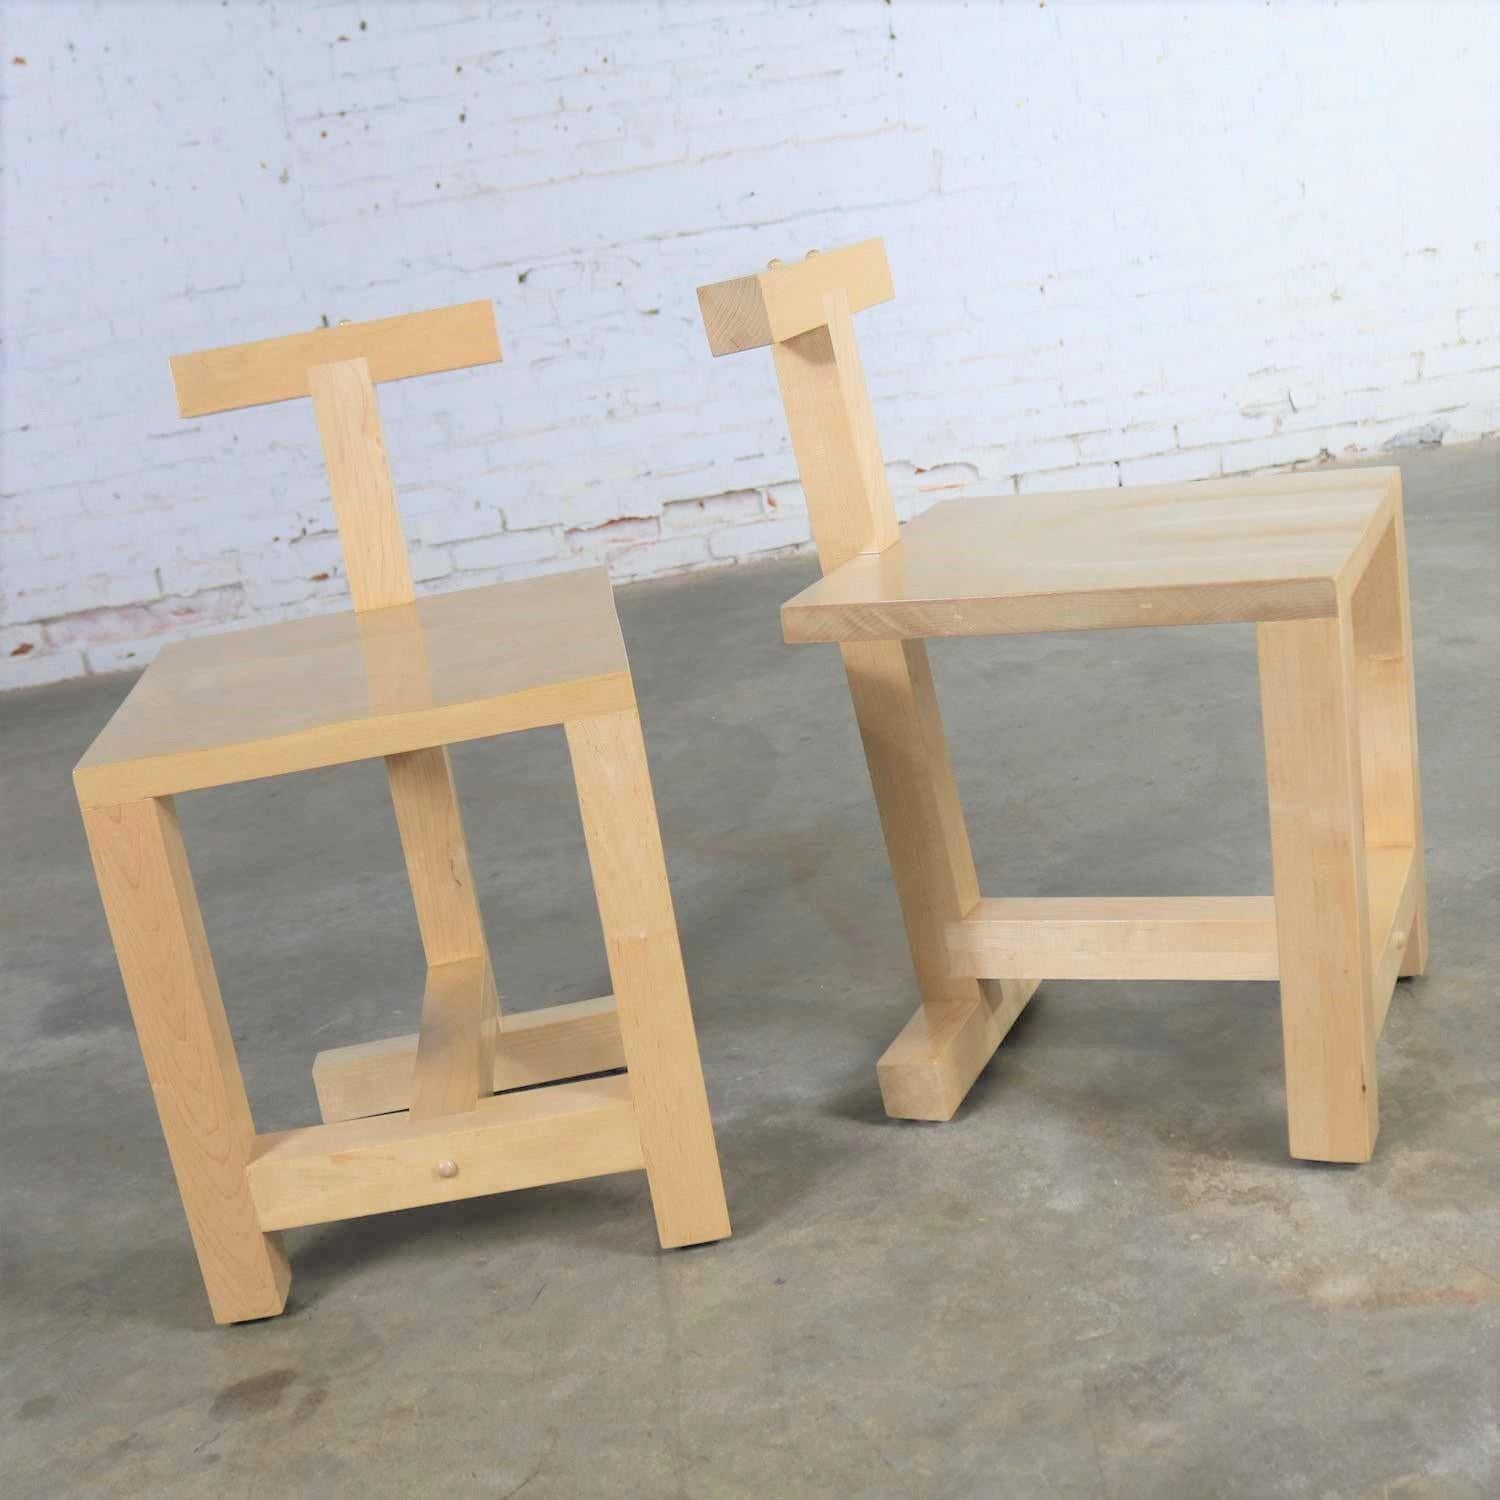 American Pair of Postmodern Handcrafted Maple Chairs Signed Brice B. Durbin 1996